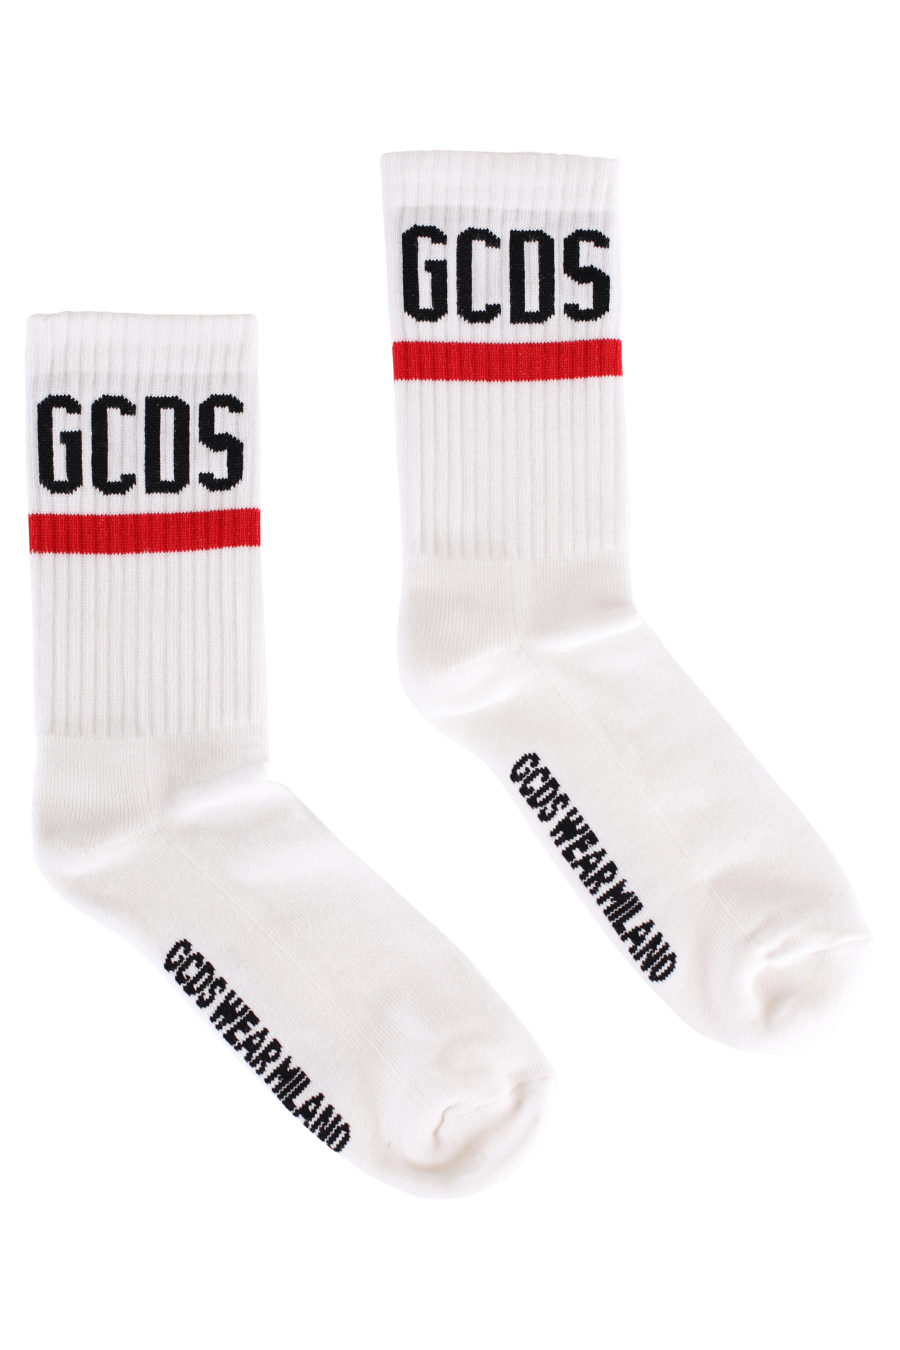 White socks with black logo and red line - IMG 1862